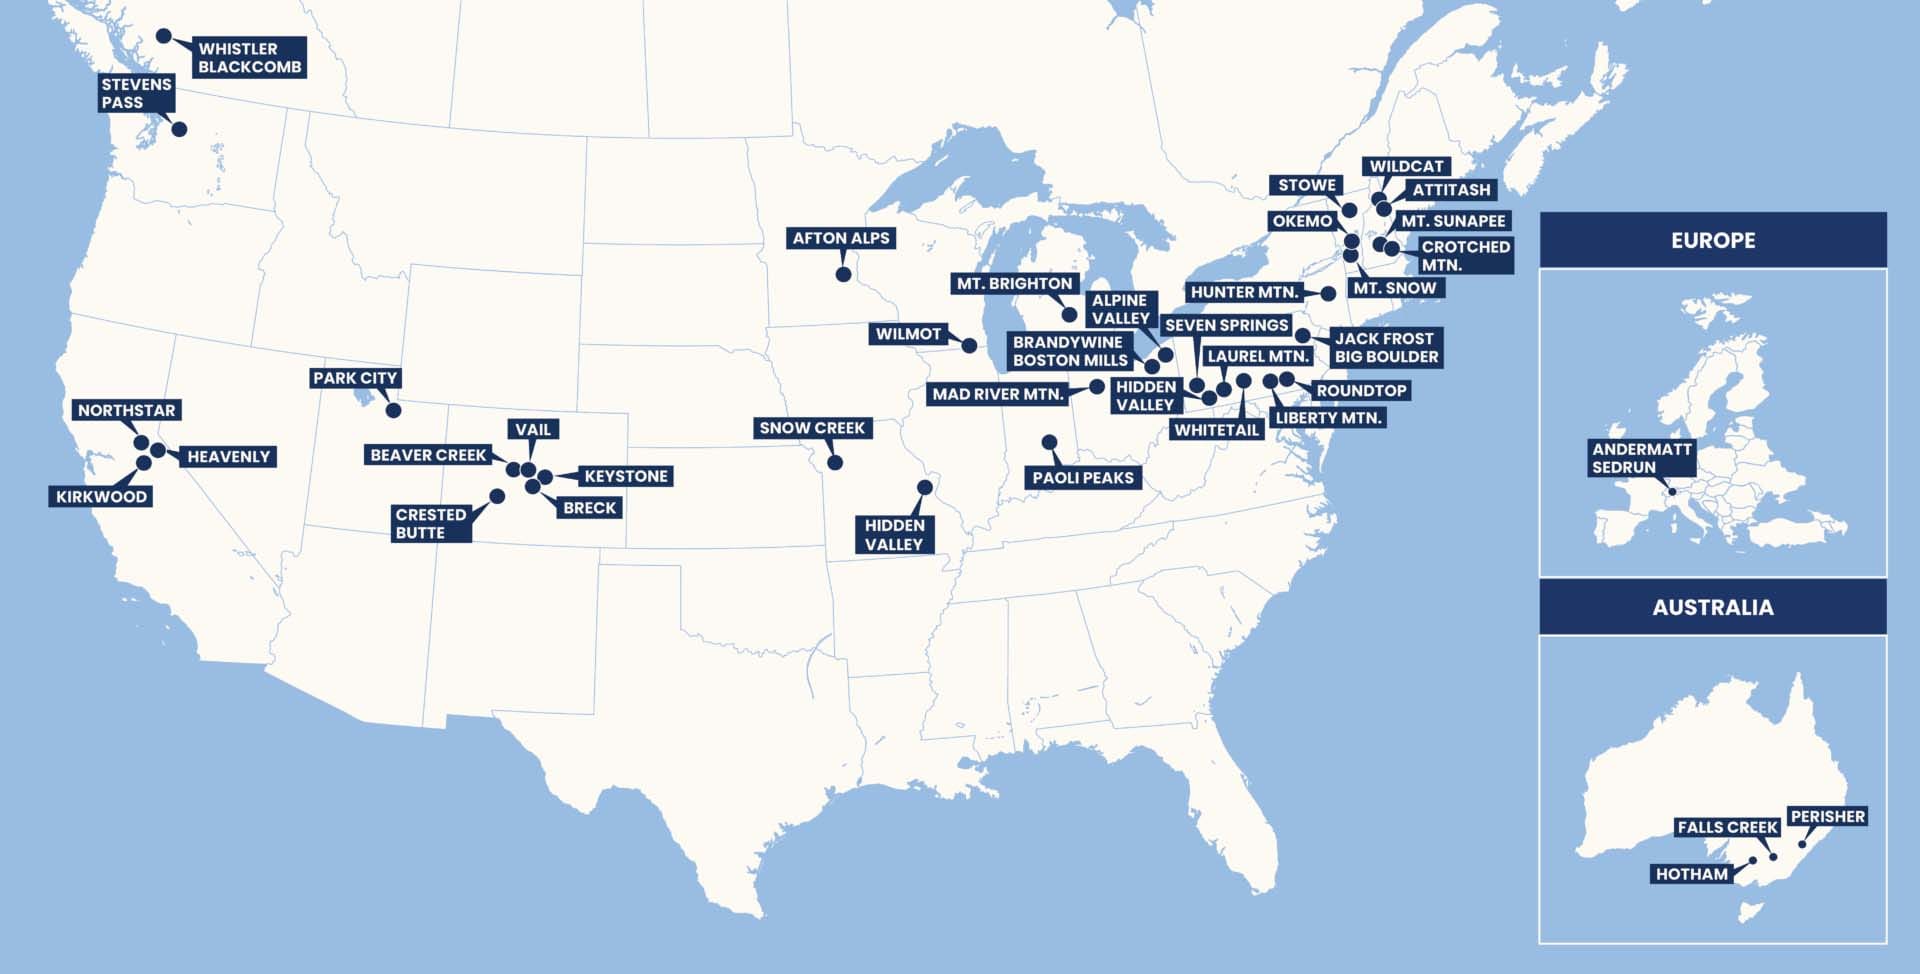 Vail Resorts properties across the globe as shown on their website.